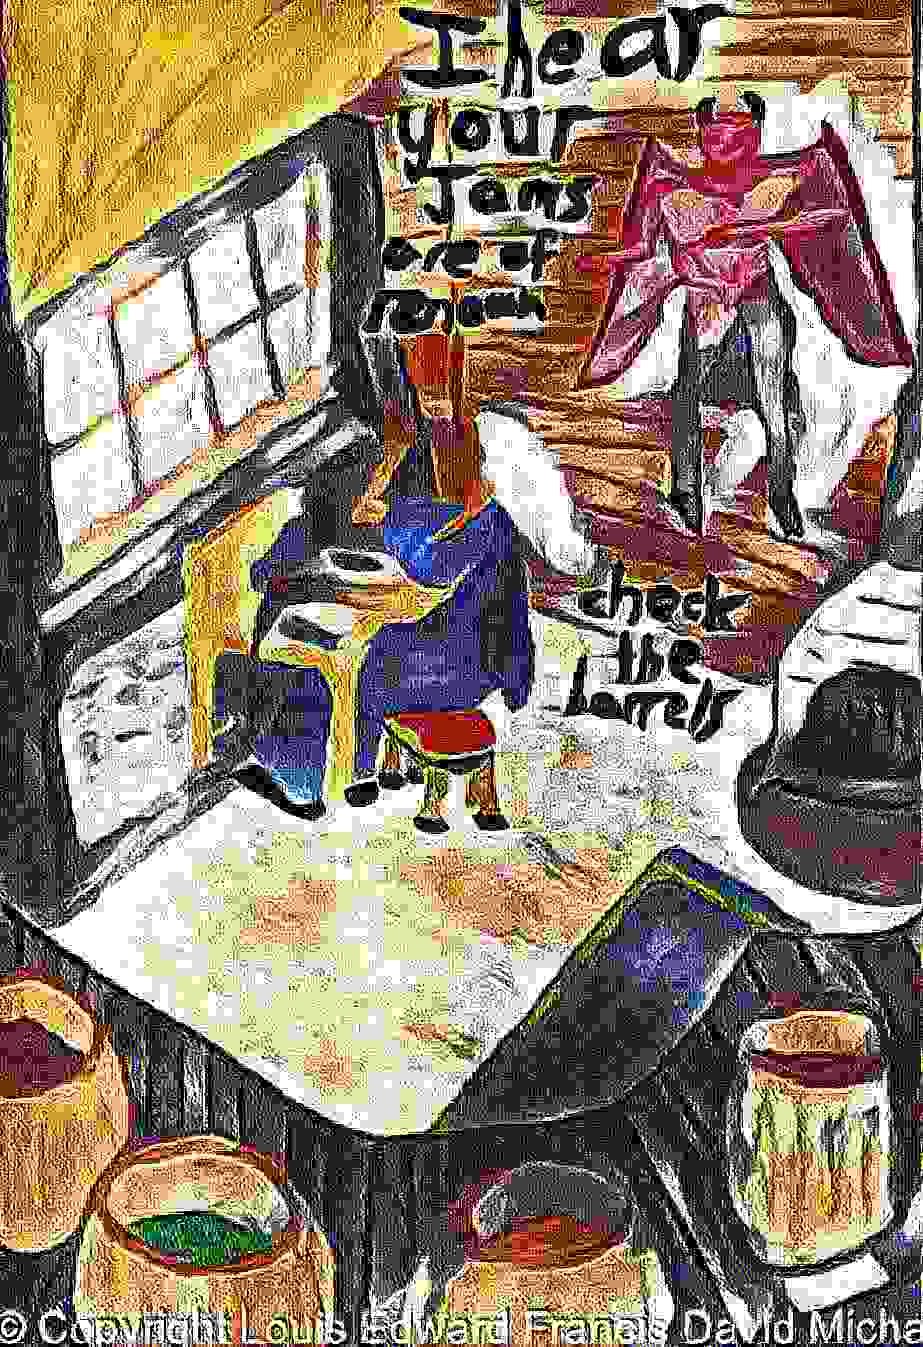 Painting Of The Jam Makers Proposal In Drawn And Digitally